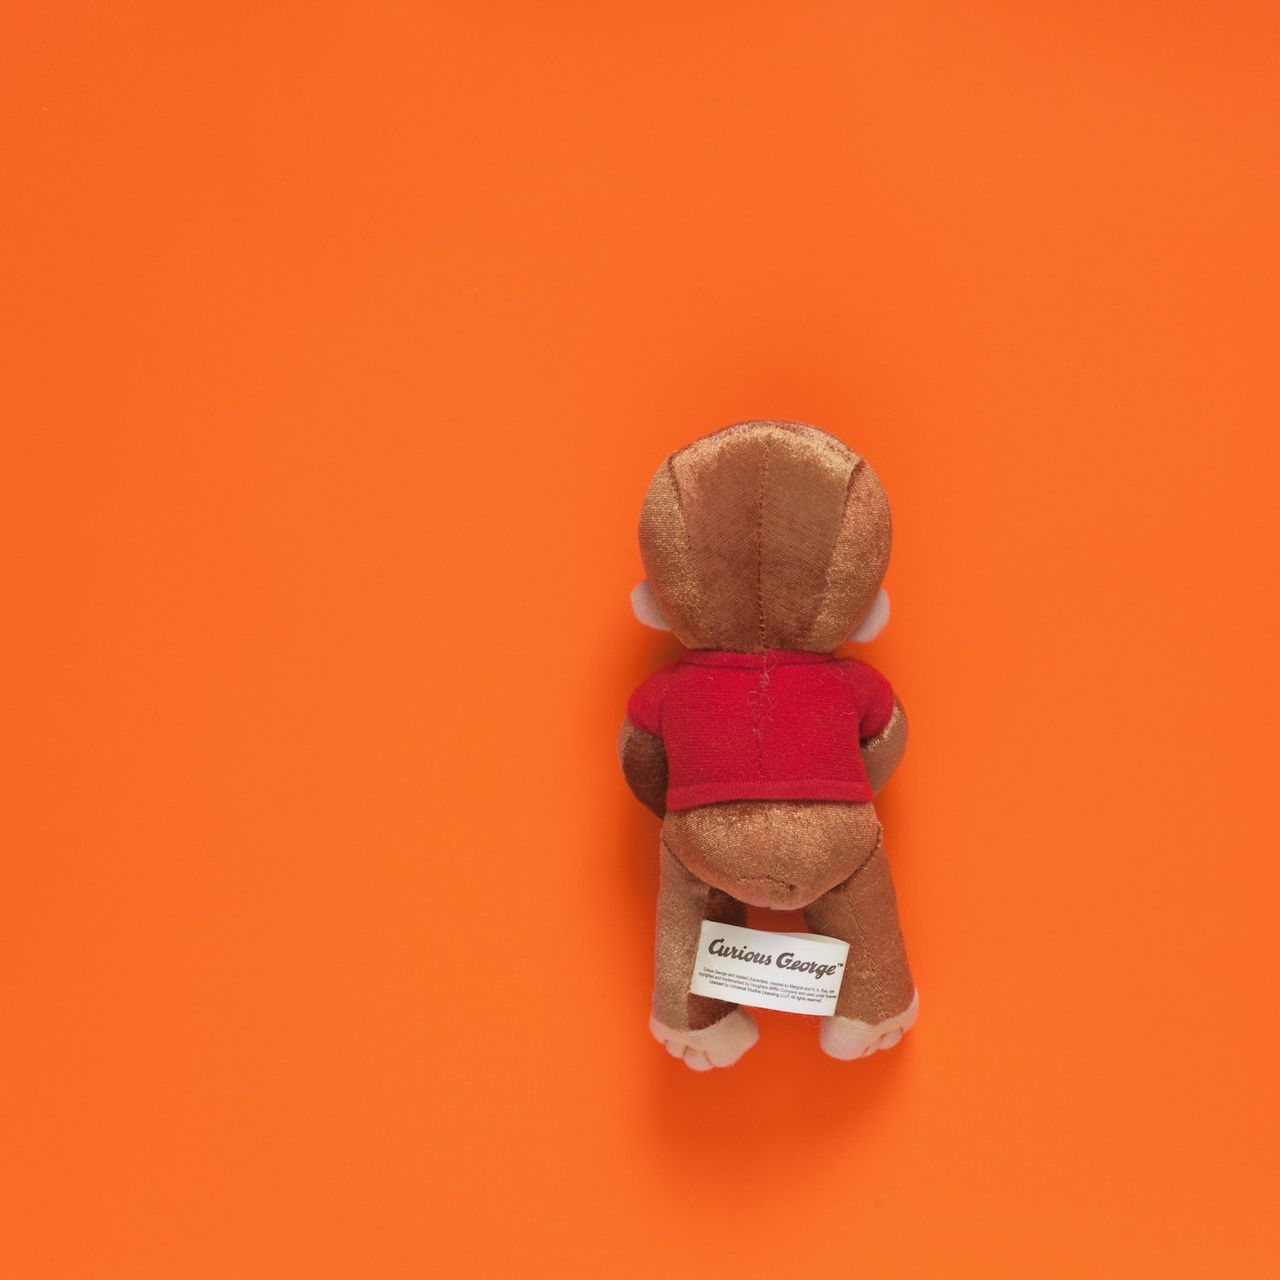 Tom Kiefer, a photographer in Arizona, spent 11 years (2003-2014) as a janitor at a Customs and Border Protection facility. He collected the items that agents confiscated from migrants and threw out, and he photographed them. "Curious George," shared with HuffPost, is part of his collection "El Sueño Americano - The American Dream" and can be found at http://tomkiefer.com and https://www.instagram.com/tomkiefer.photographer/.